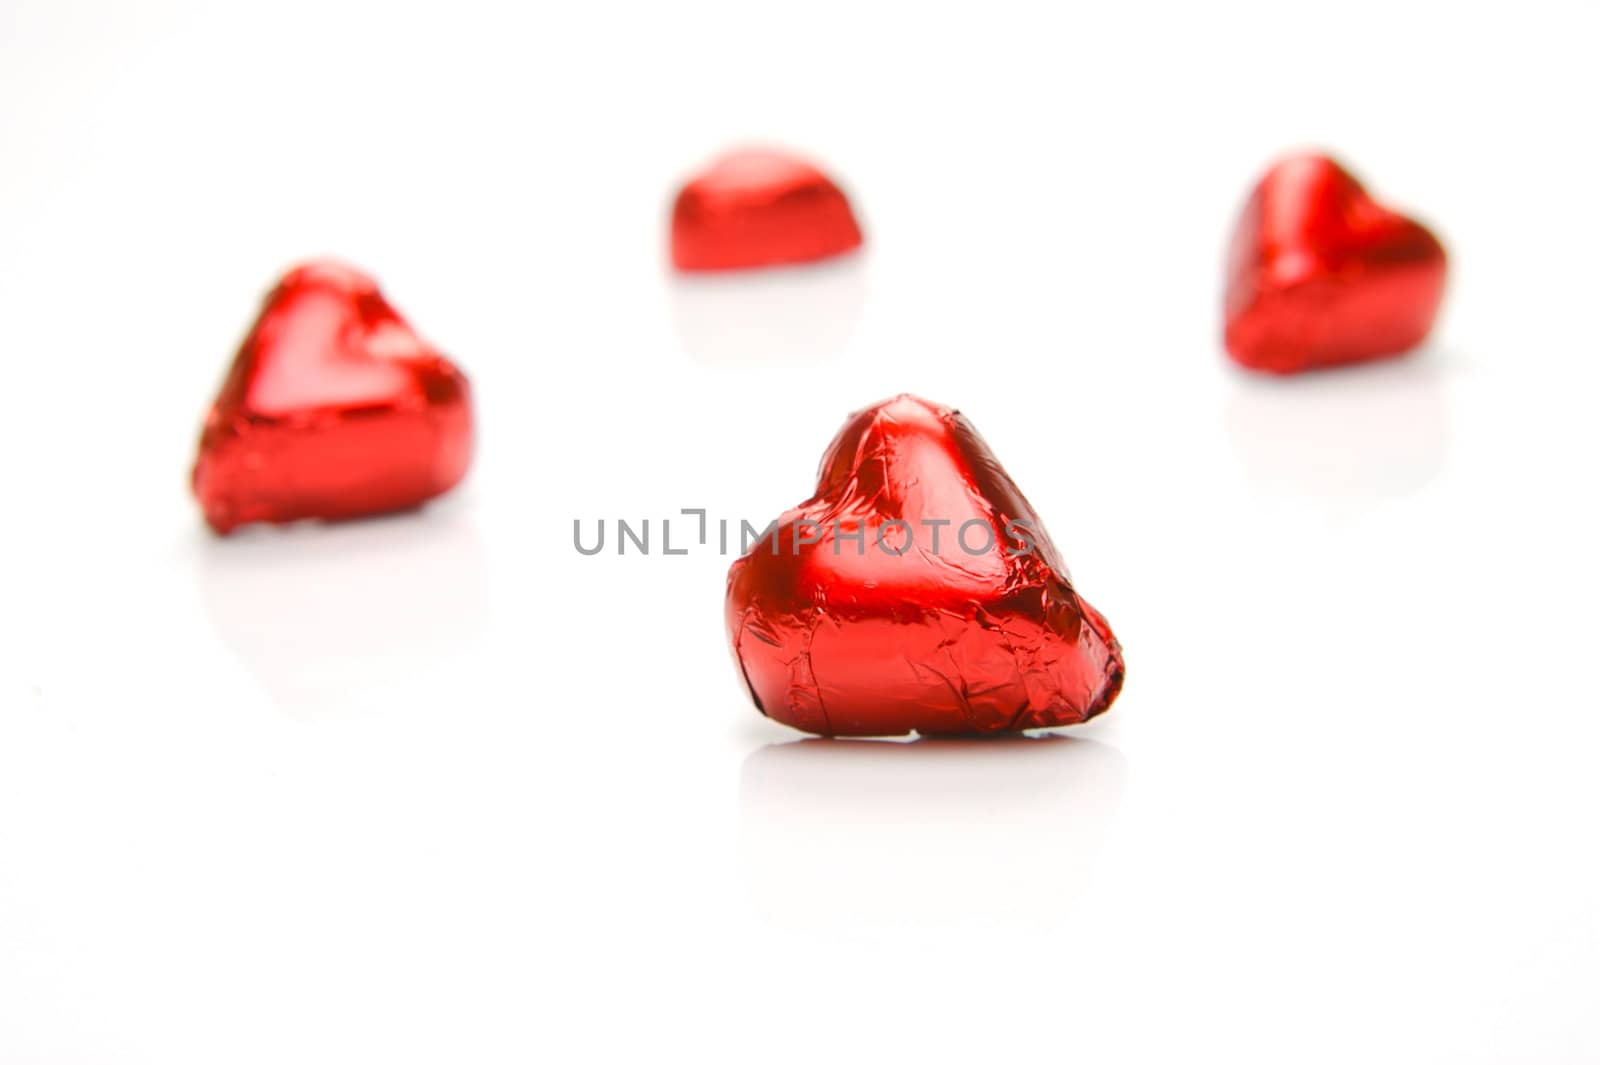 Chocolate Love Hearts by Kitch